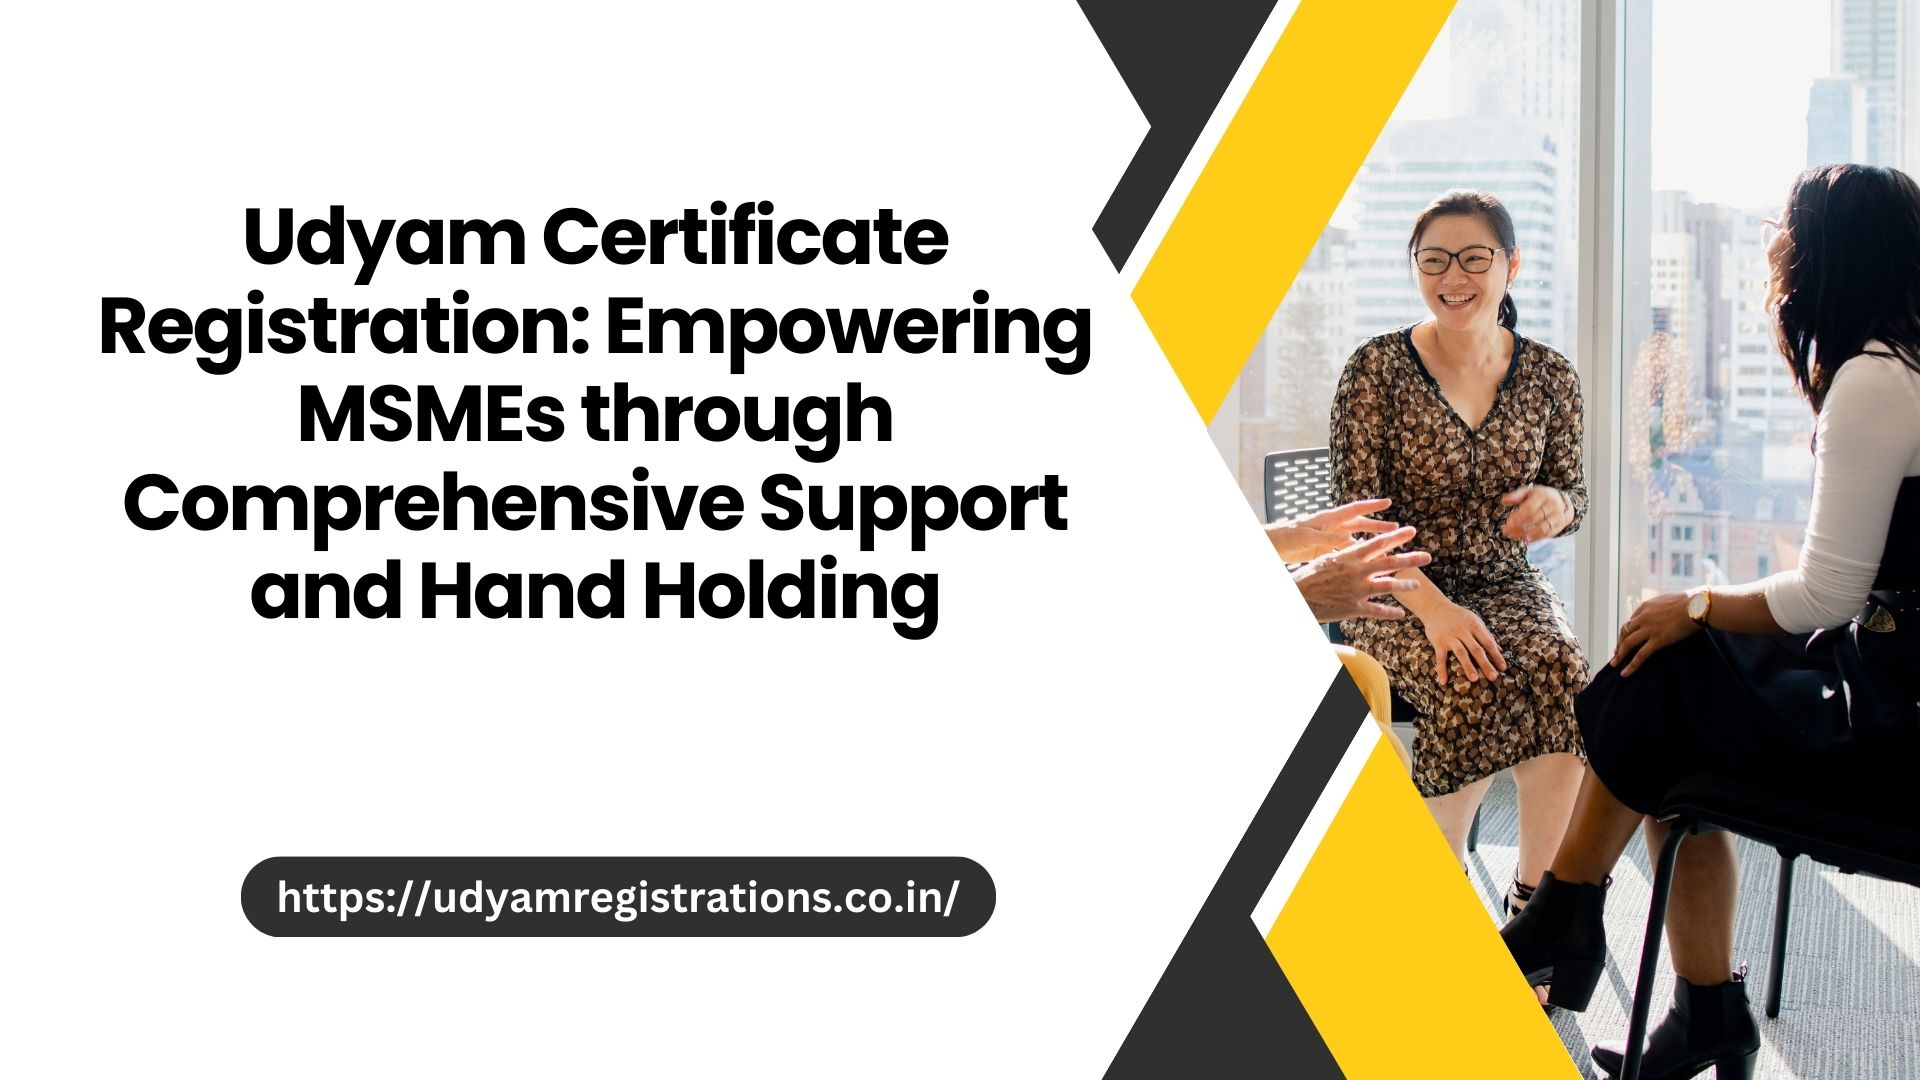 Udyam Certificate Registration: Empowering MSMEs through Comprehensive Support and Hand Holding